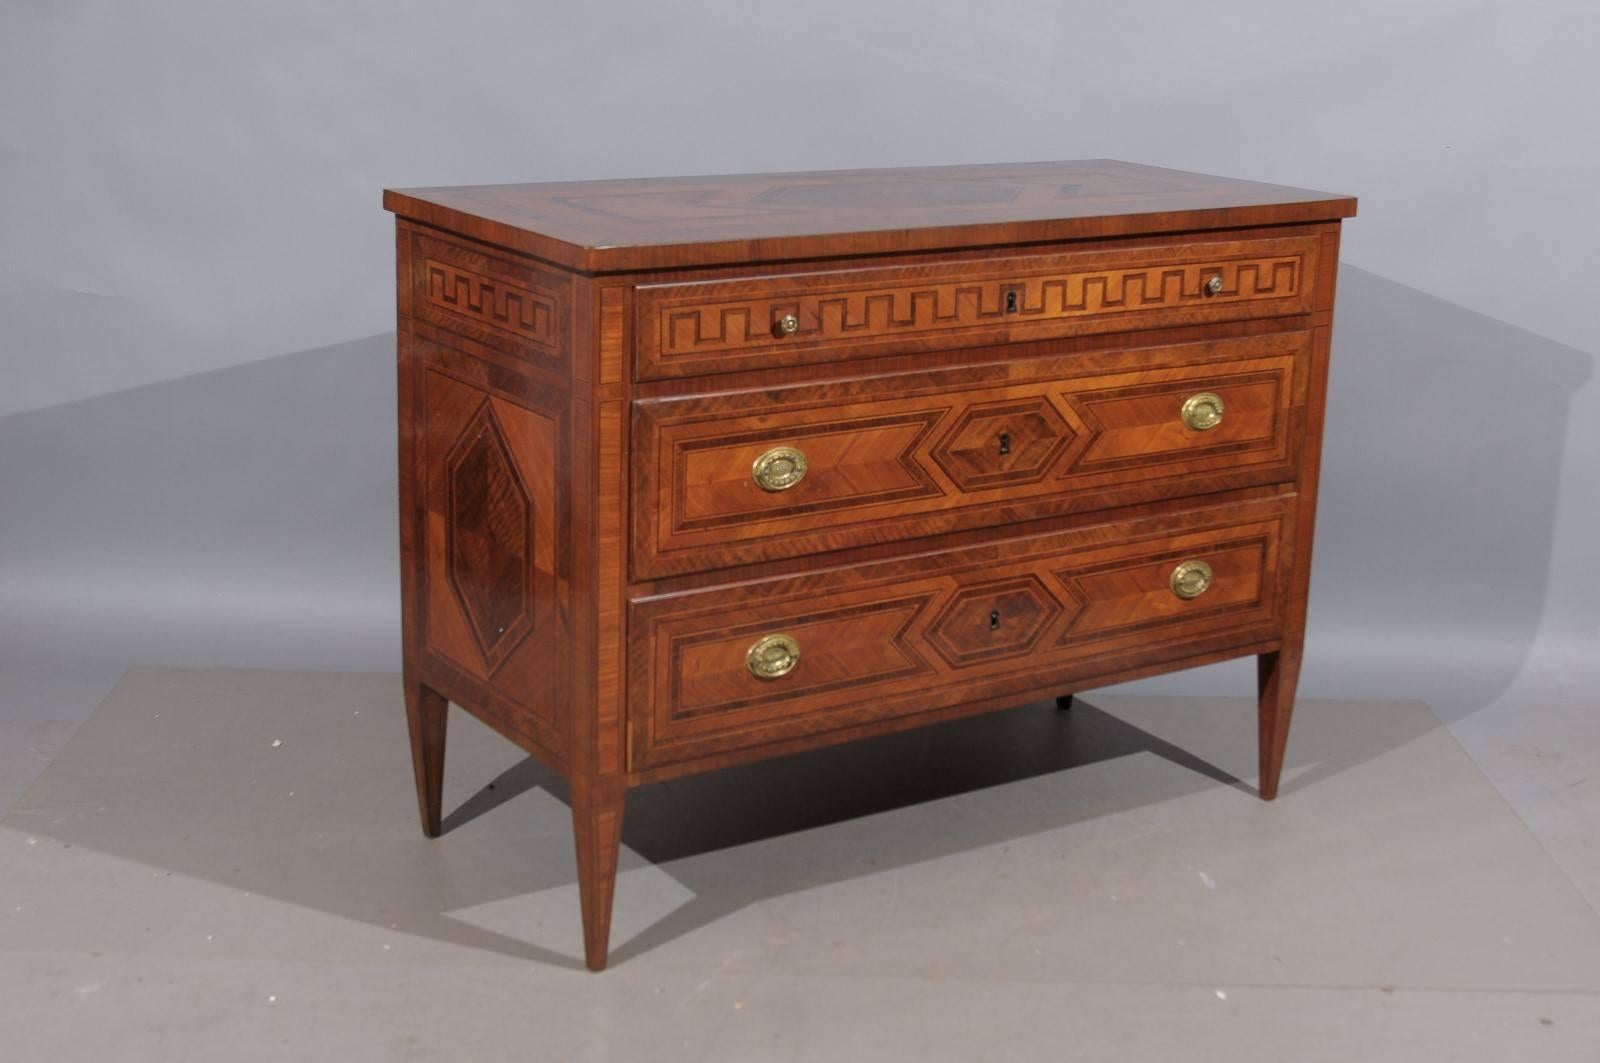 A pair of early 19th century Italian neoclassical style inlaid walnut commodes with Greek key inlay.